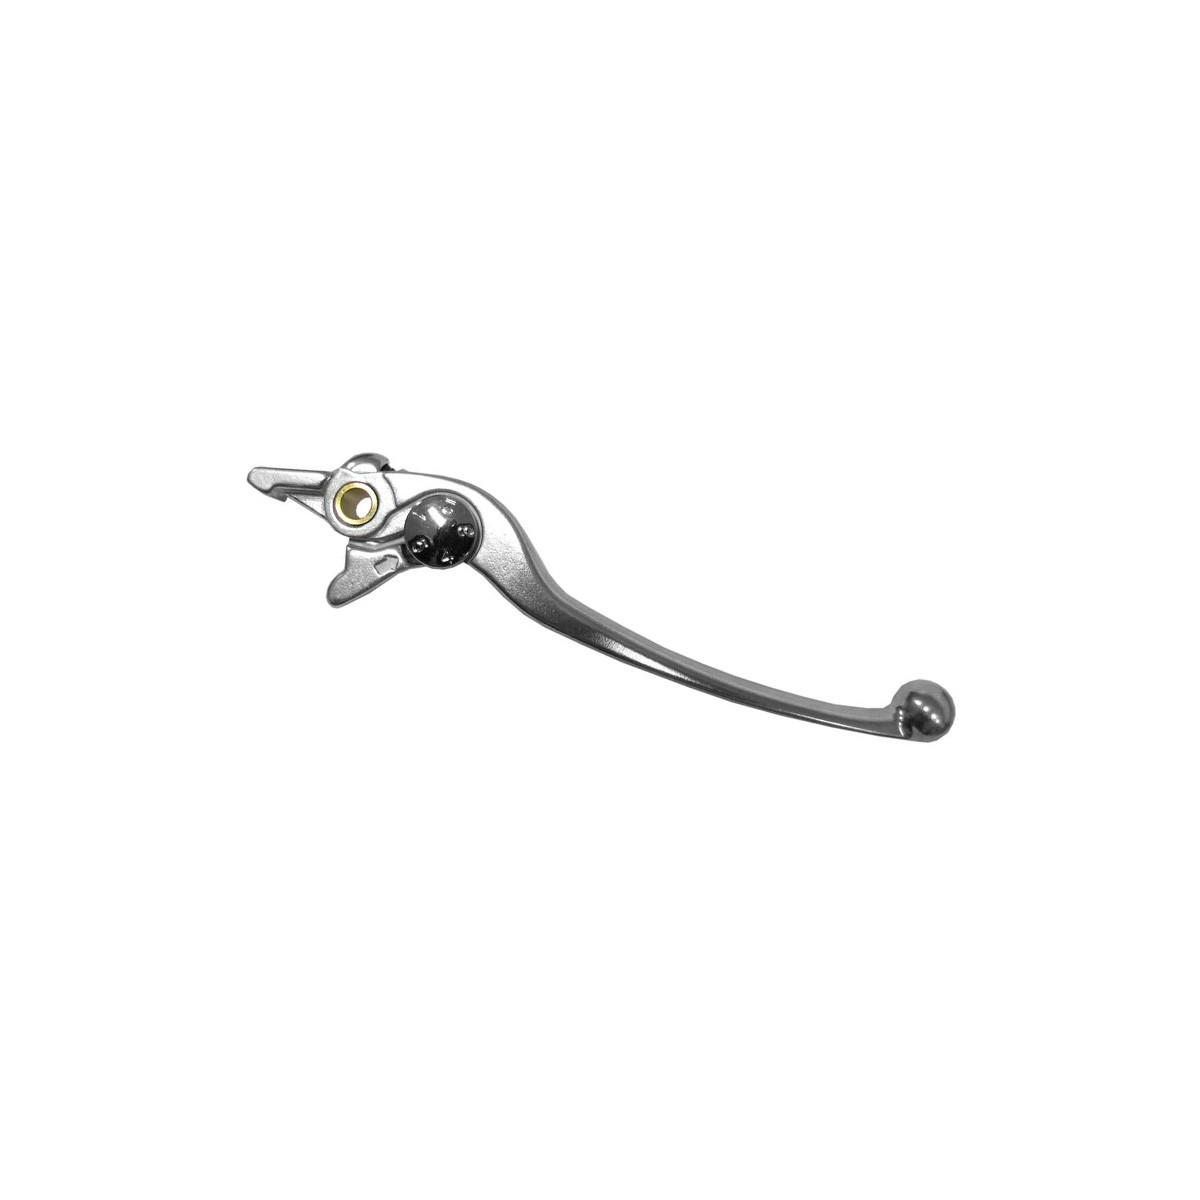 T2025750, Lever Assy, Five Position